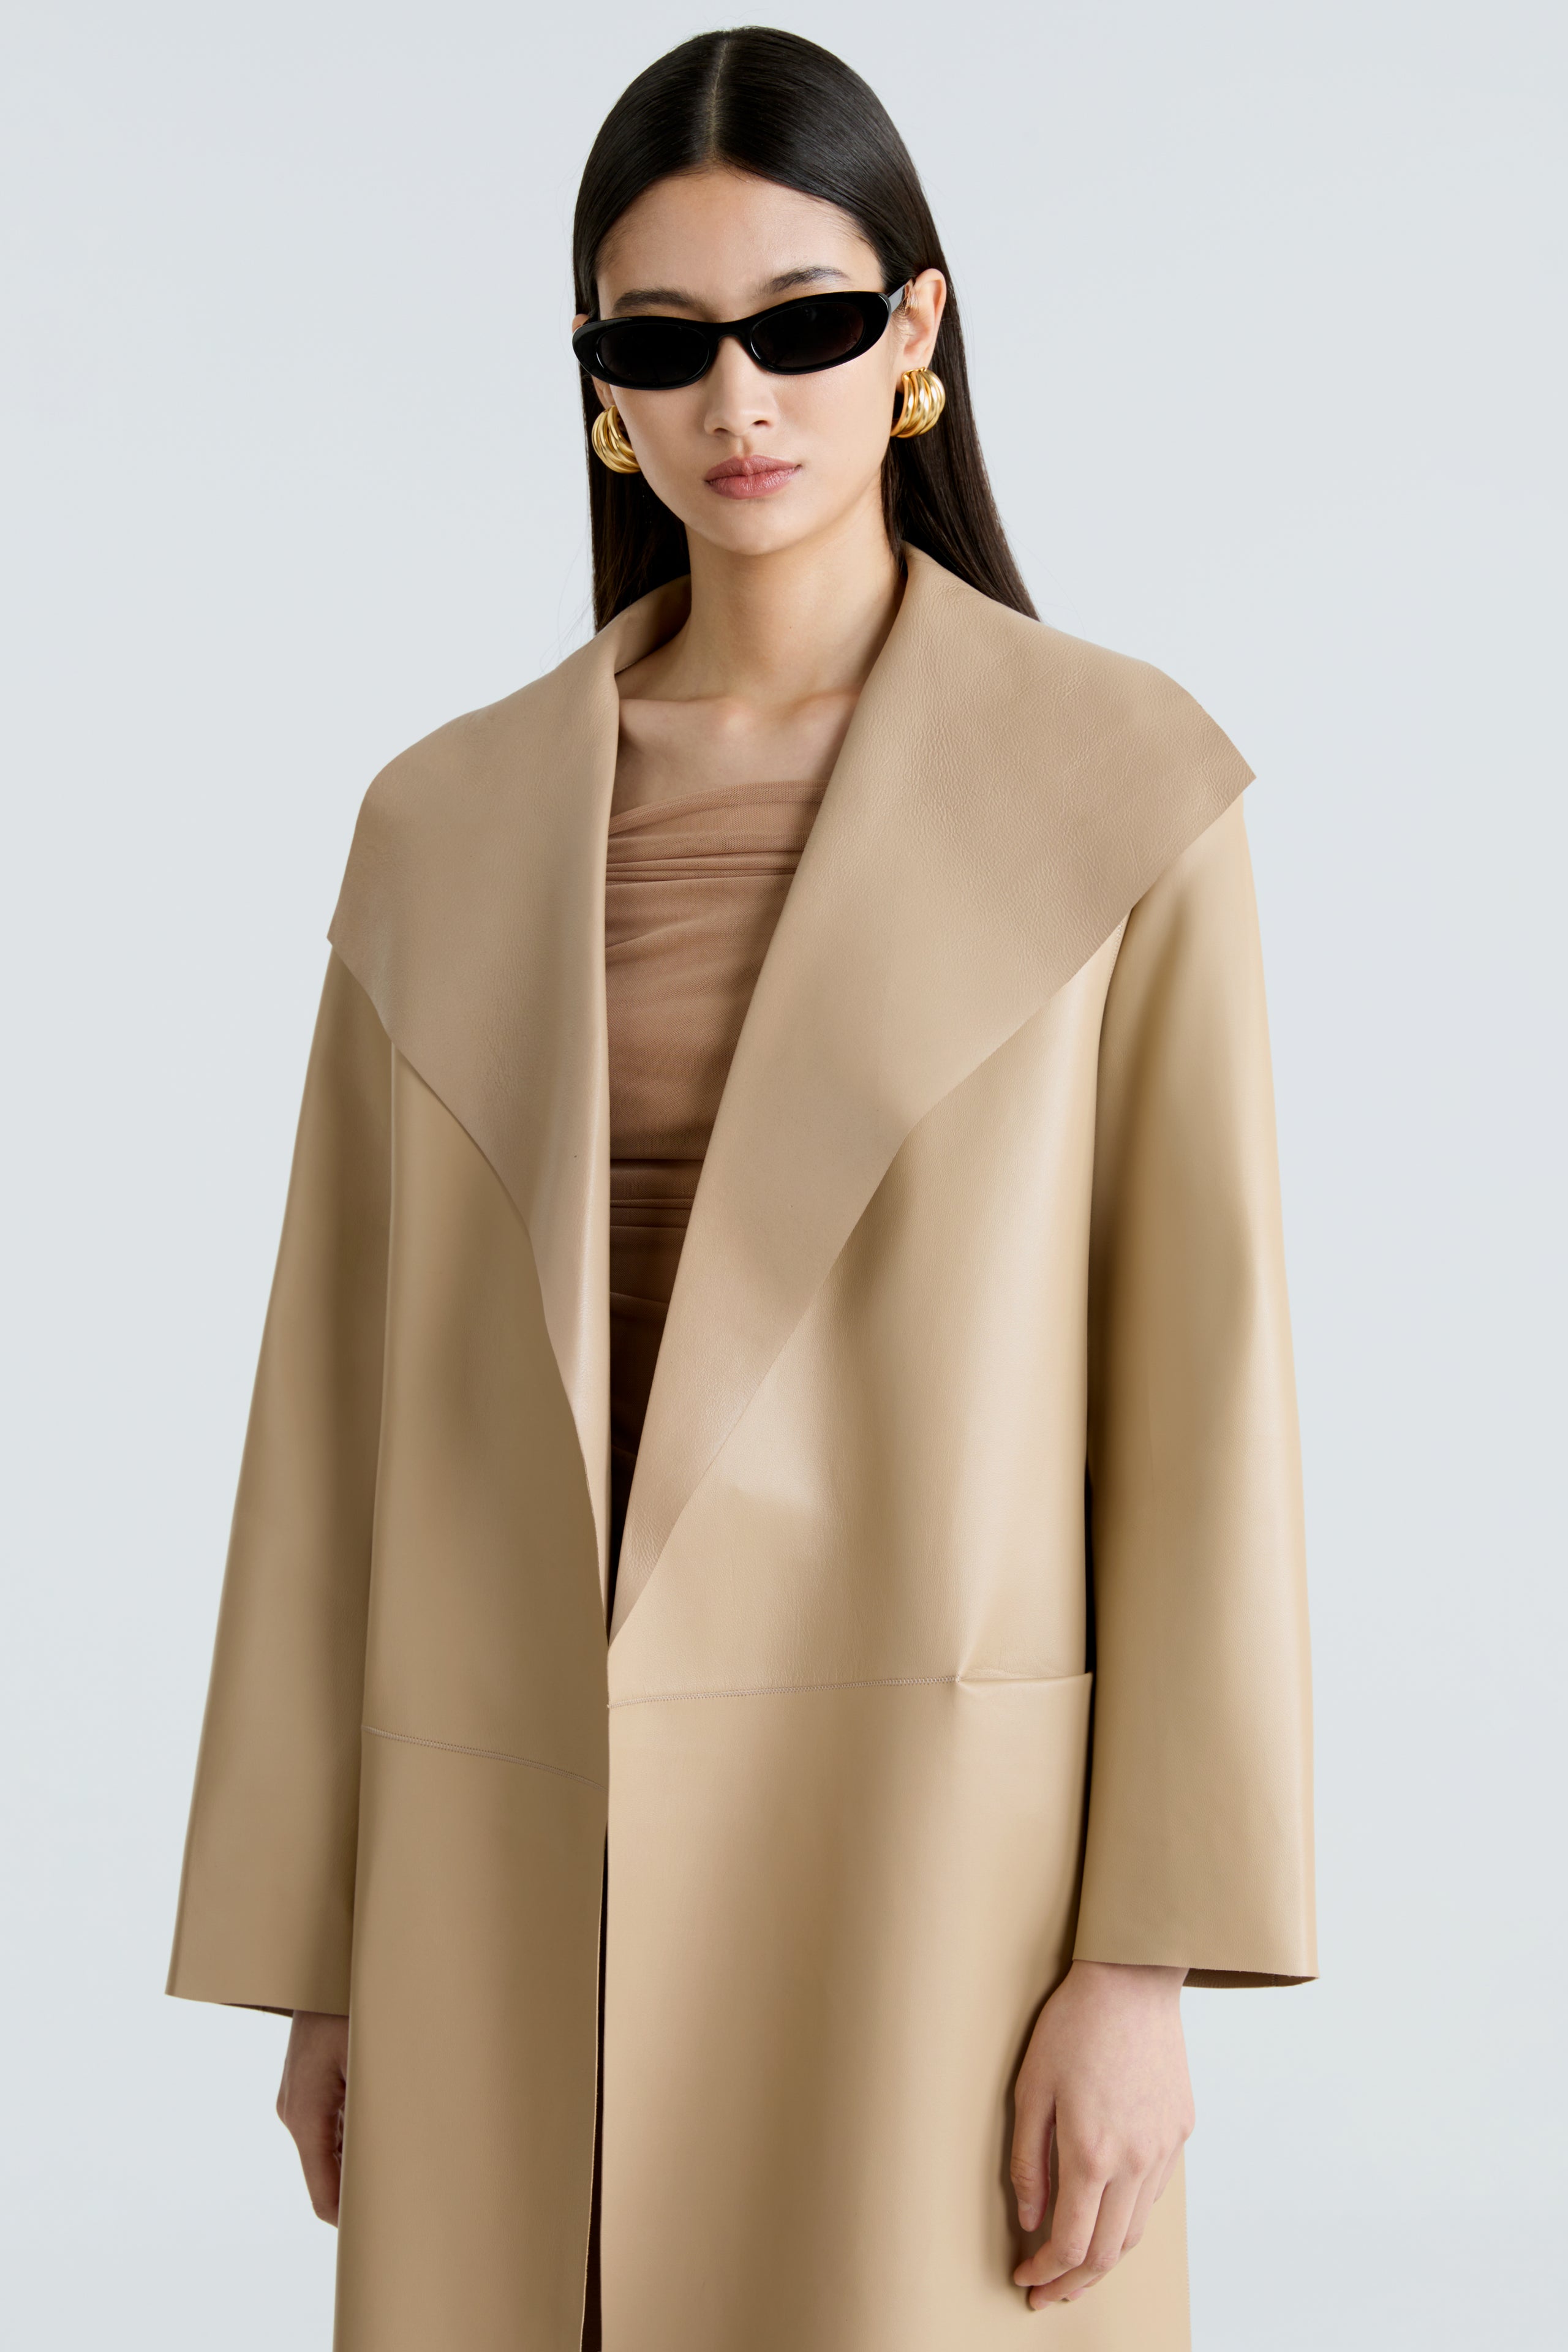 Model is wearing the Nour Hammour Birthday Coat Leather Beige Draped Leather Coat Close Up